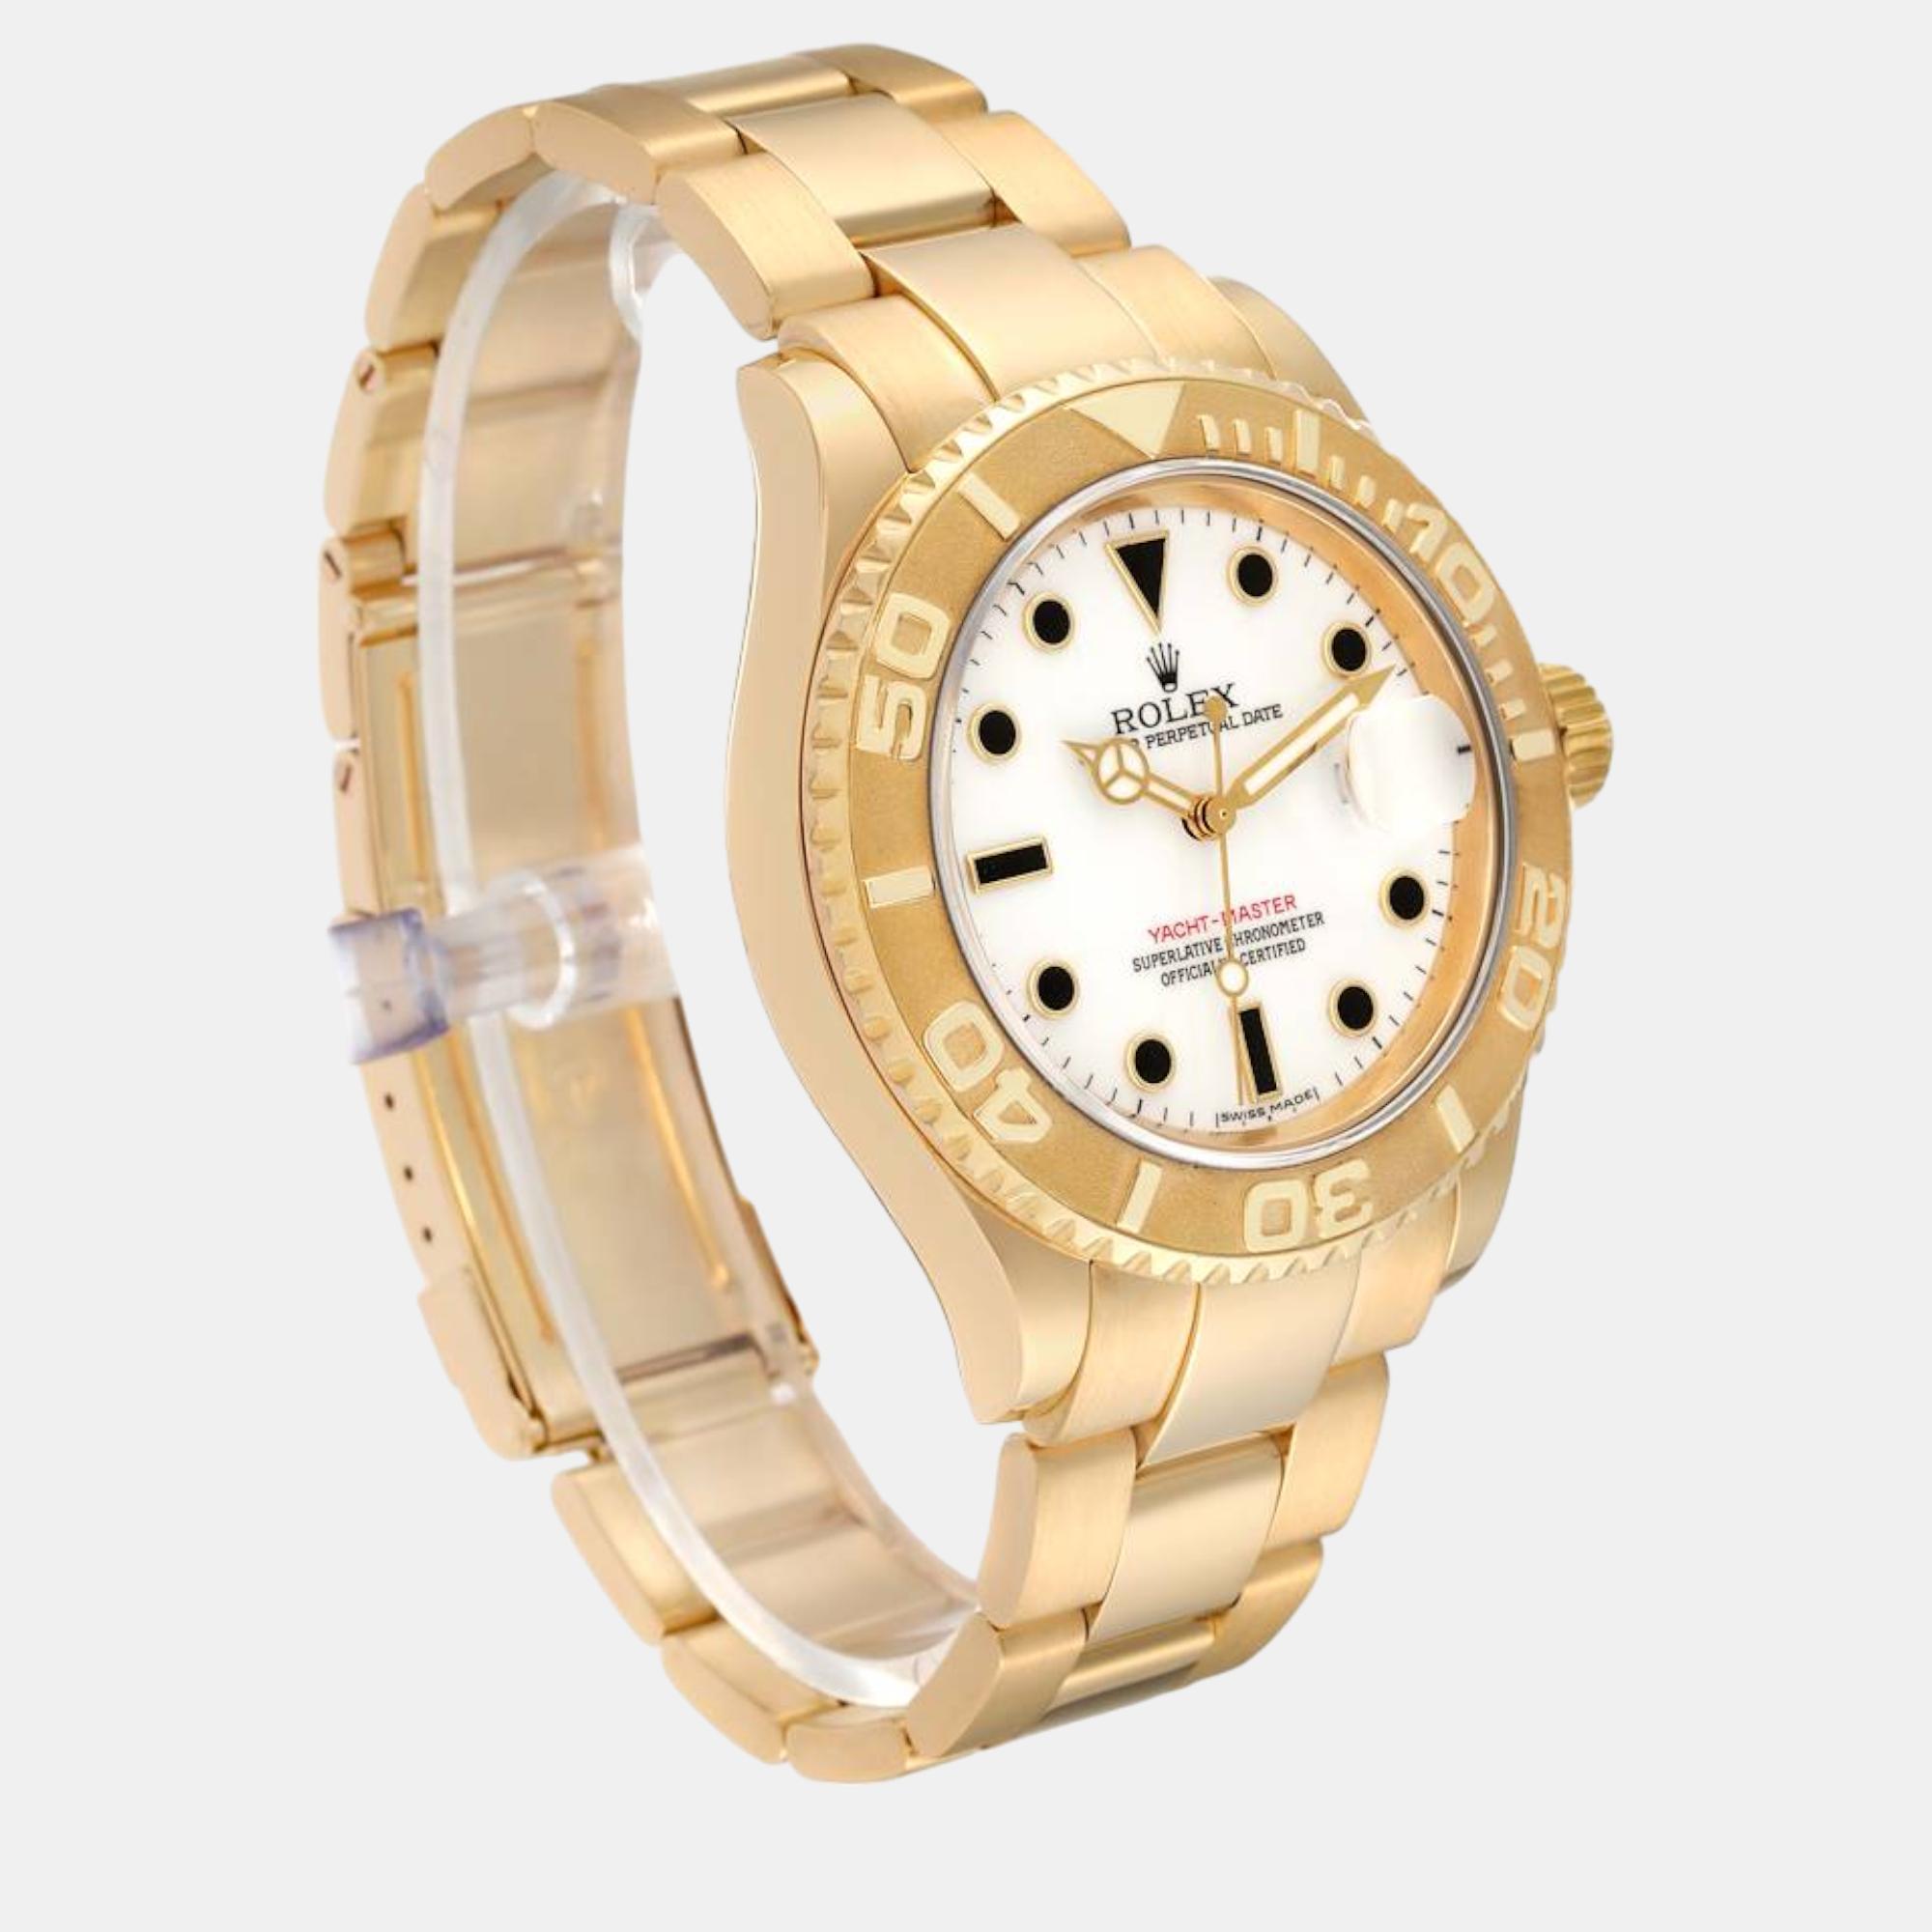 Rolex Yachtmaster 40mm Yellow Gold White Dial Mens Watch 16628